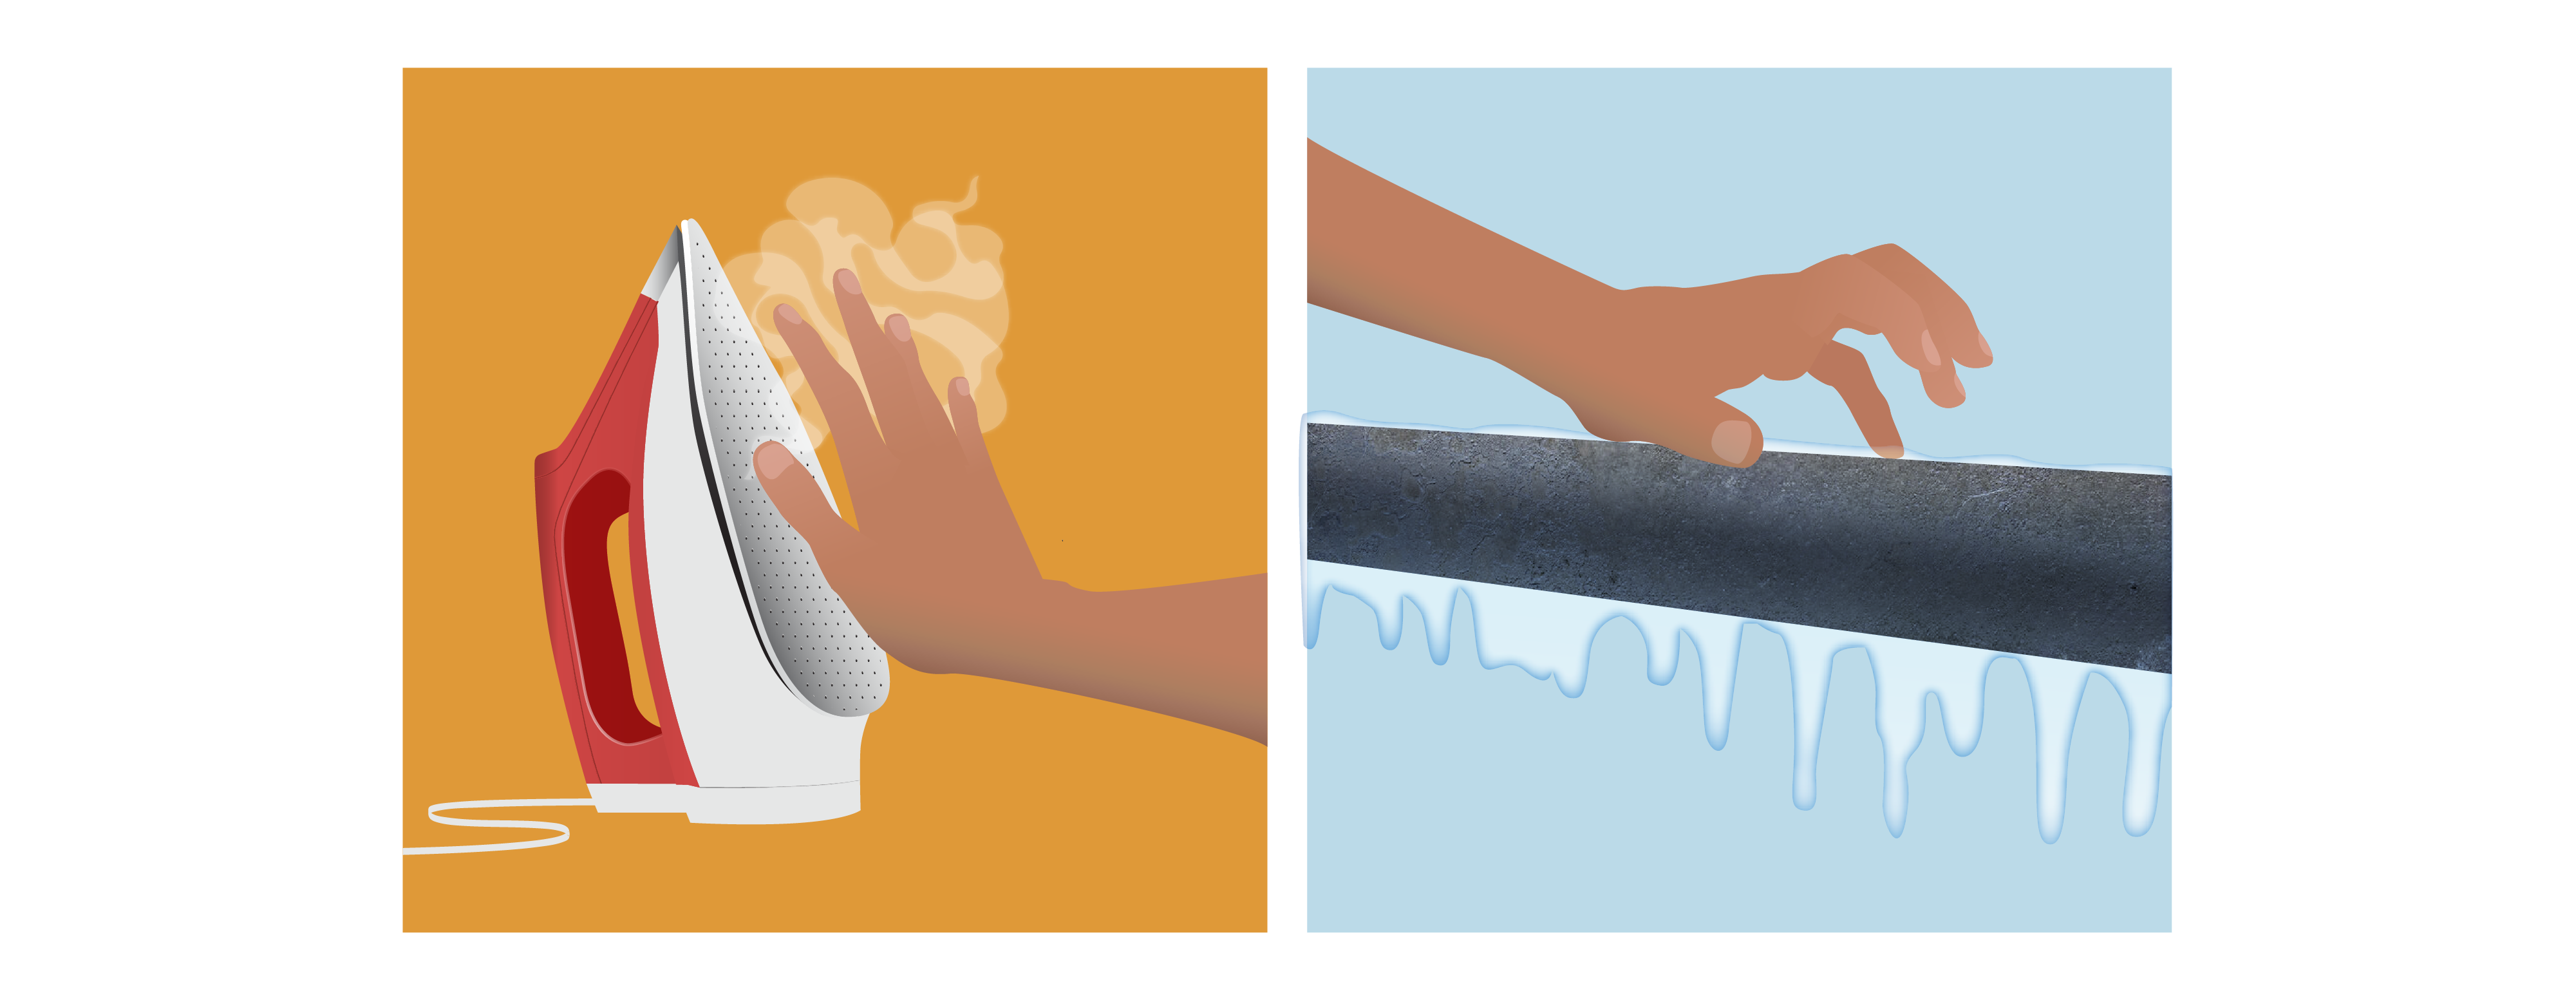 Left: a red clothing iron emits steam in front of an orange background. A hand approaches the hot iron. A red exclamation mark hovers over the hand. Right: a metal railing with icicles is in front of a blue background. A hand approaches the railing. A blue exclamation mark hovers over the hand.